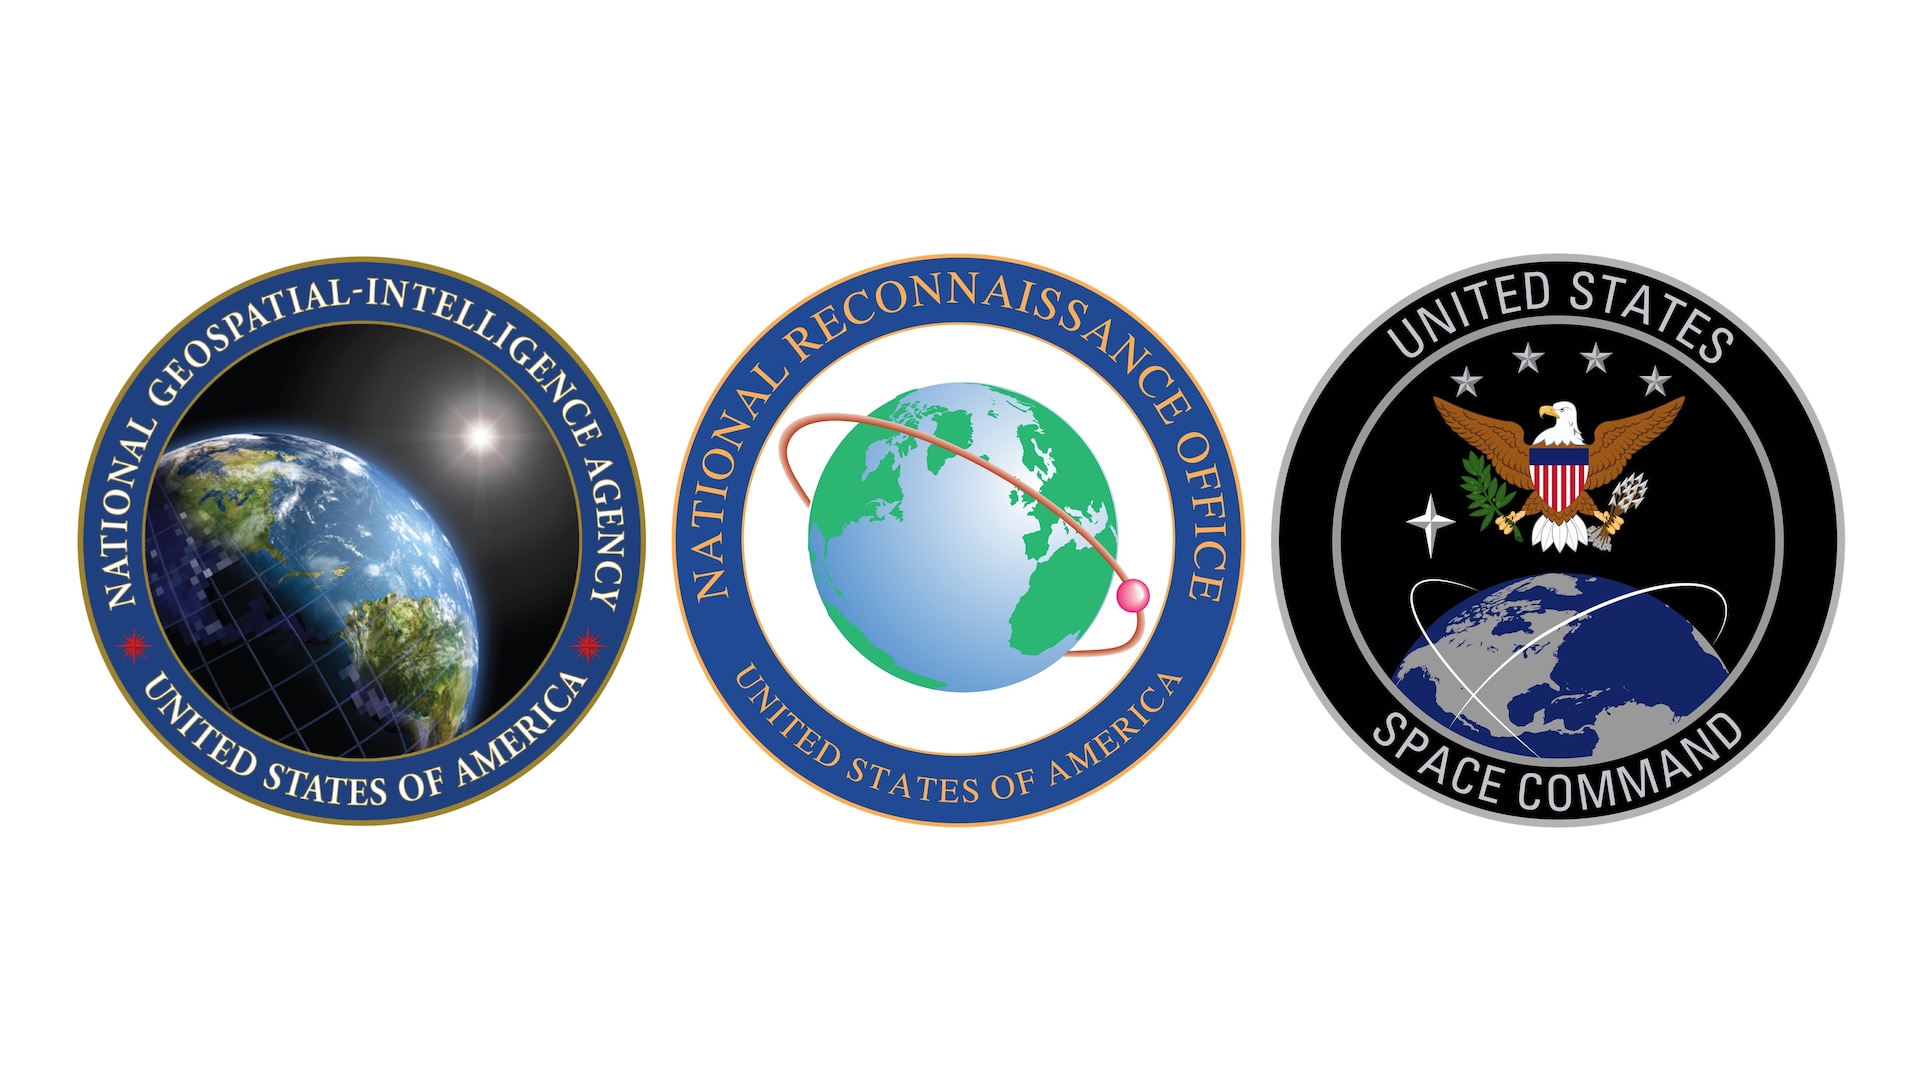 The National Geospatial-Intelligence Agency, the National Reconnaissance Office and U.S. Space Command recently signed a first-of-its-kind agreement outlining a framework to enable the protection of commercial remote sensing space assets vital to the nation’s intelligence collection mission.